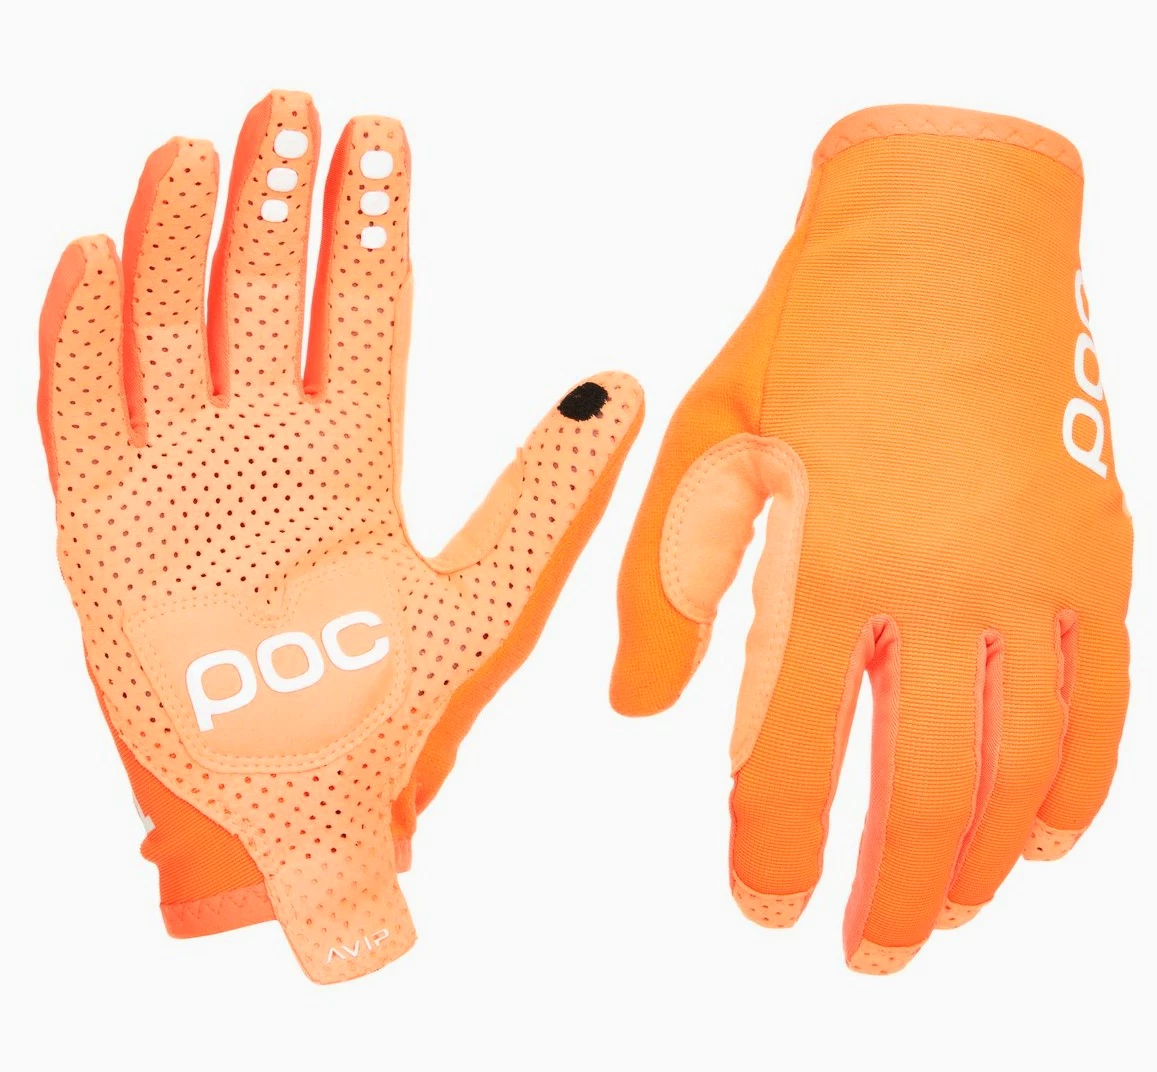 Cycling Gloves POC S